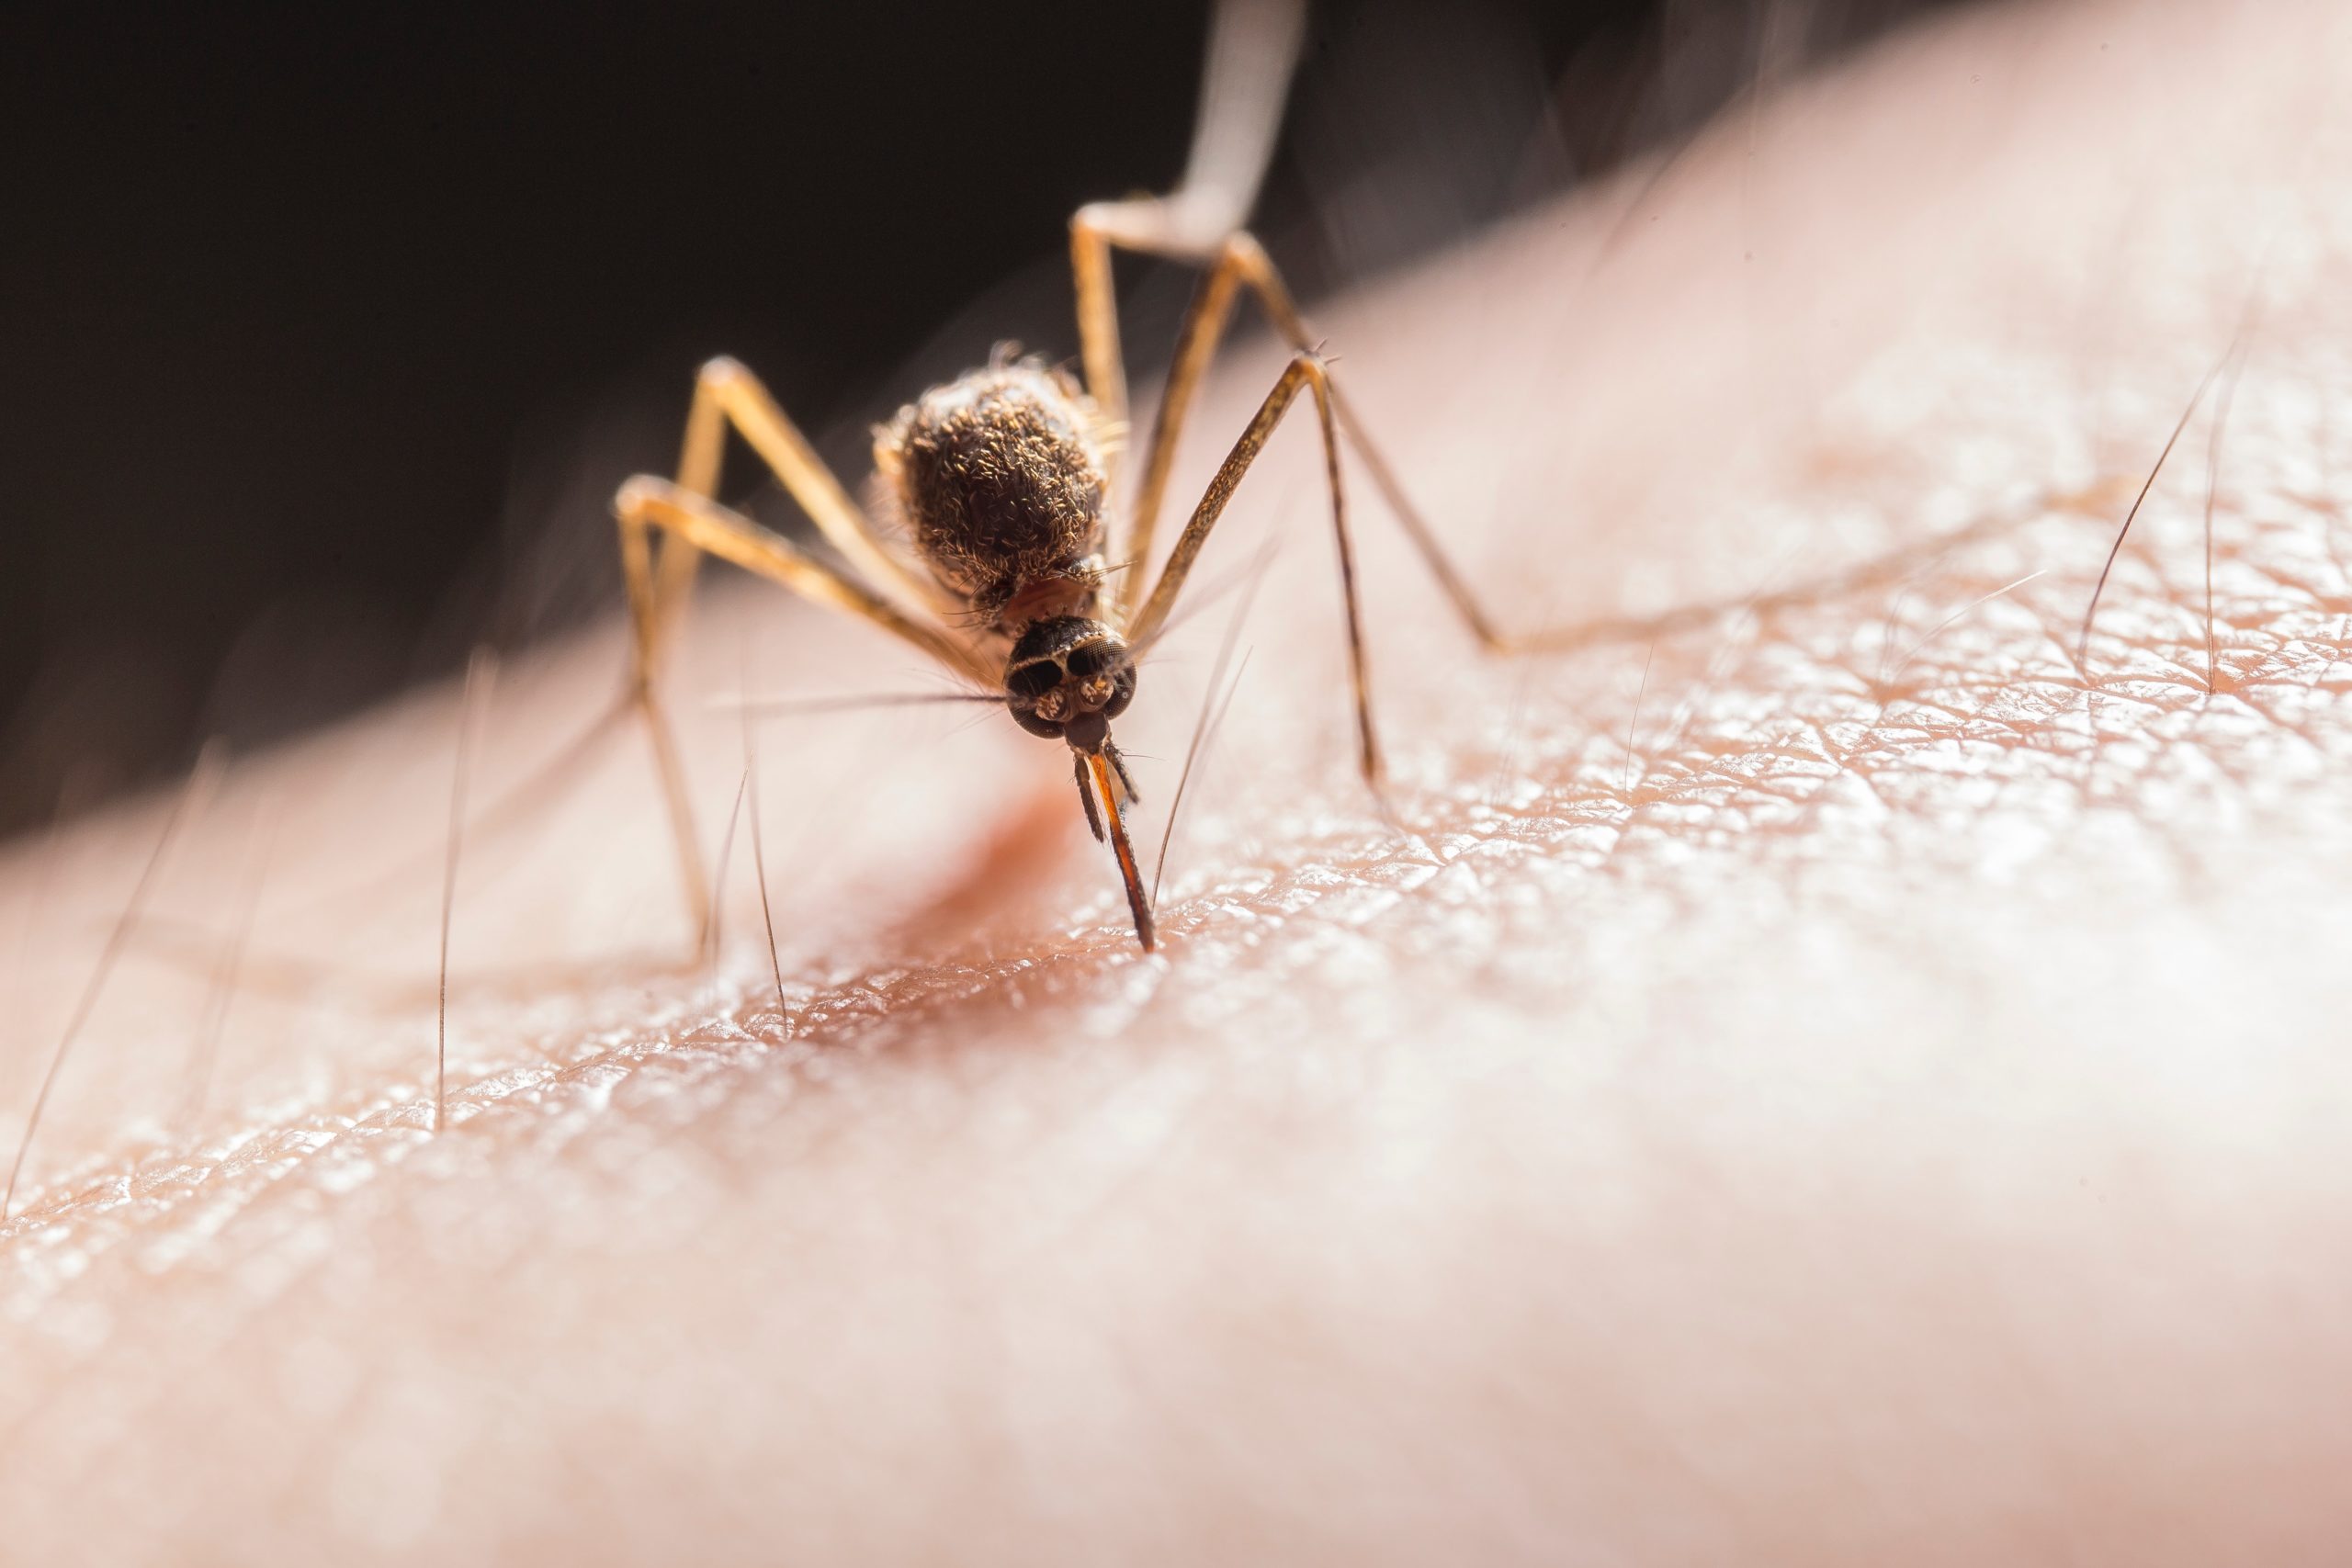 Mosquito Bite Treatments That Really Work